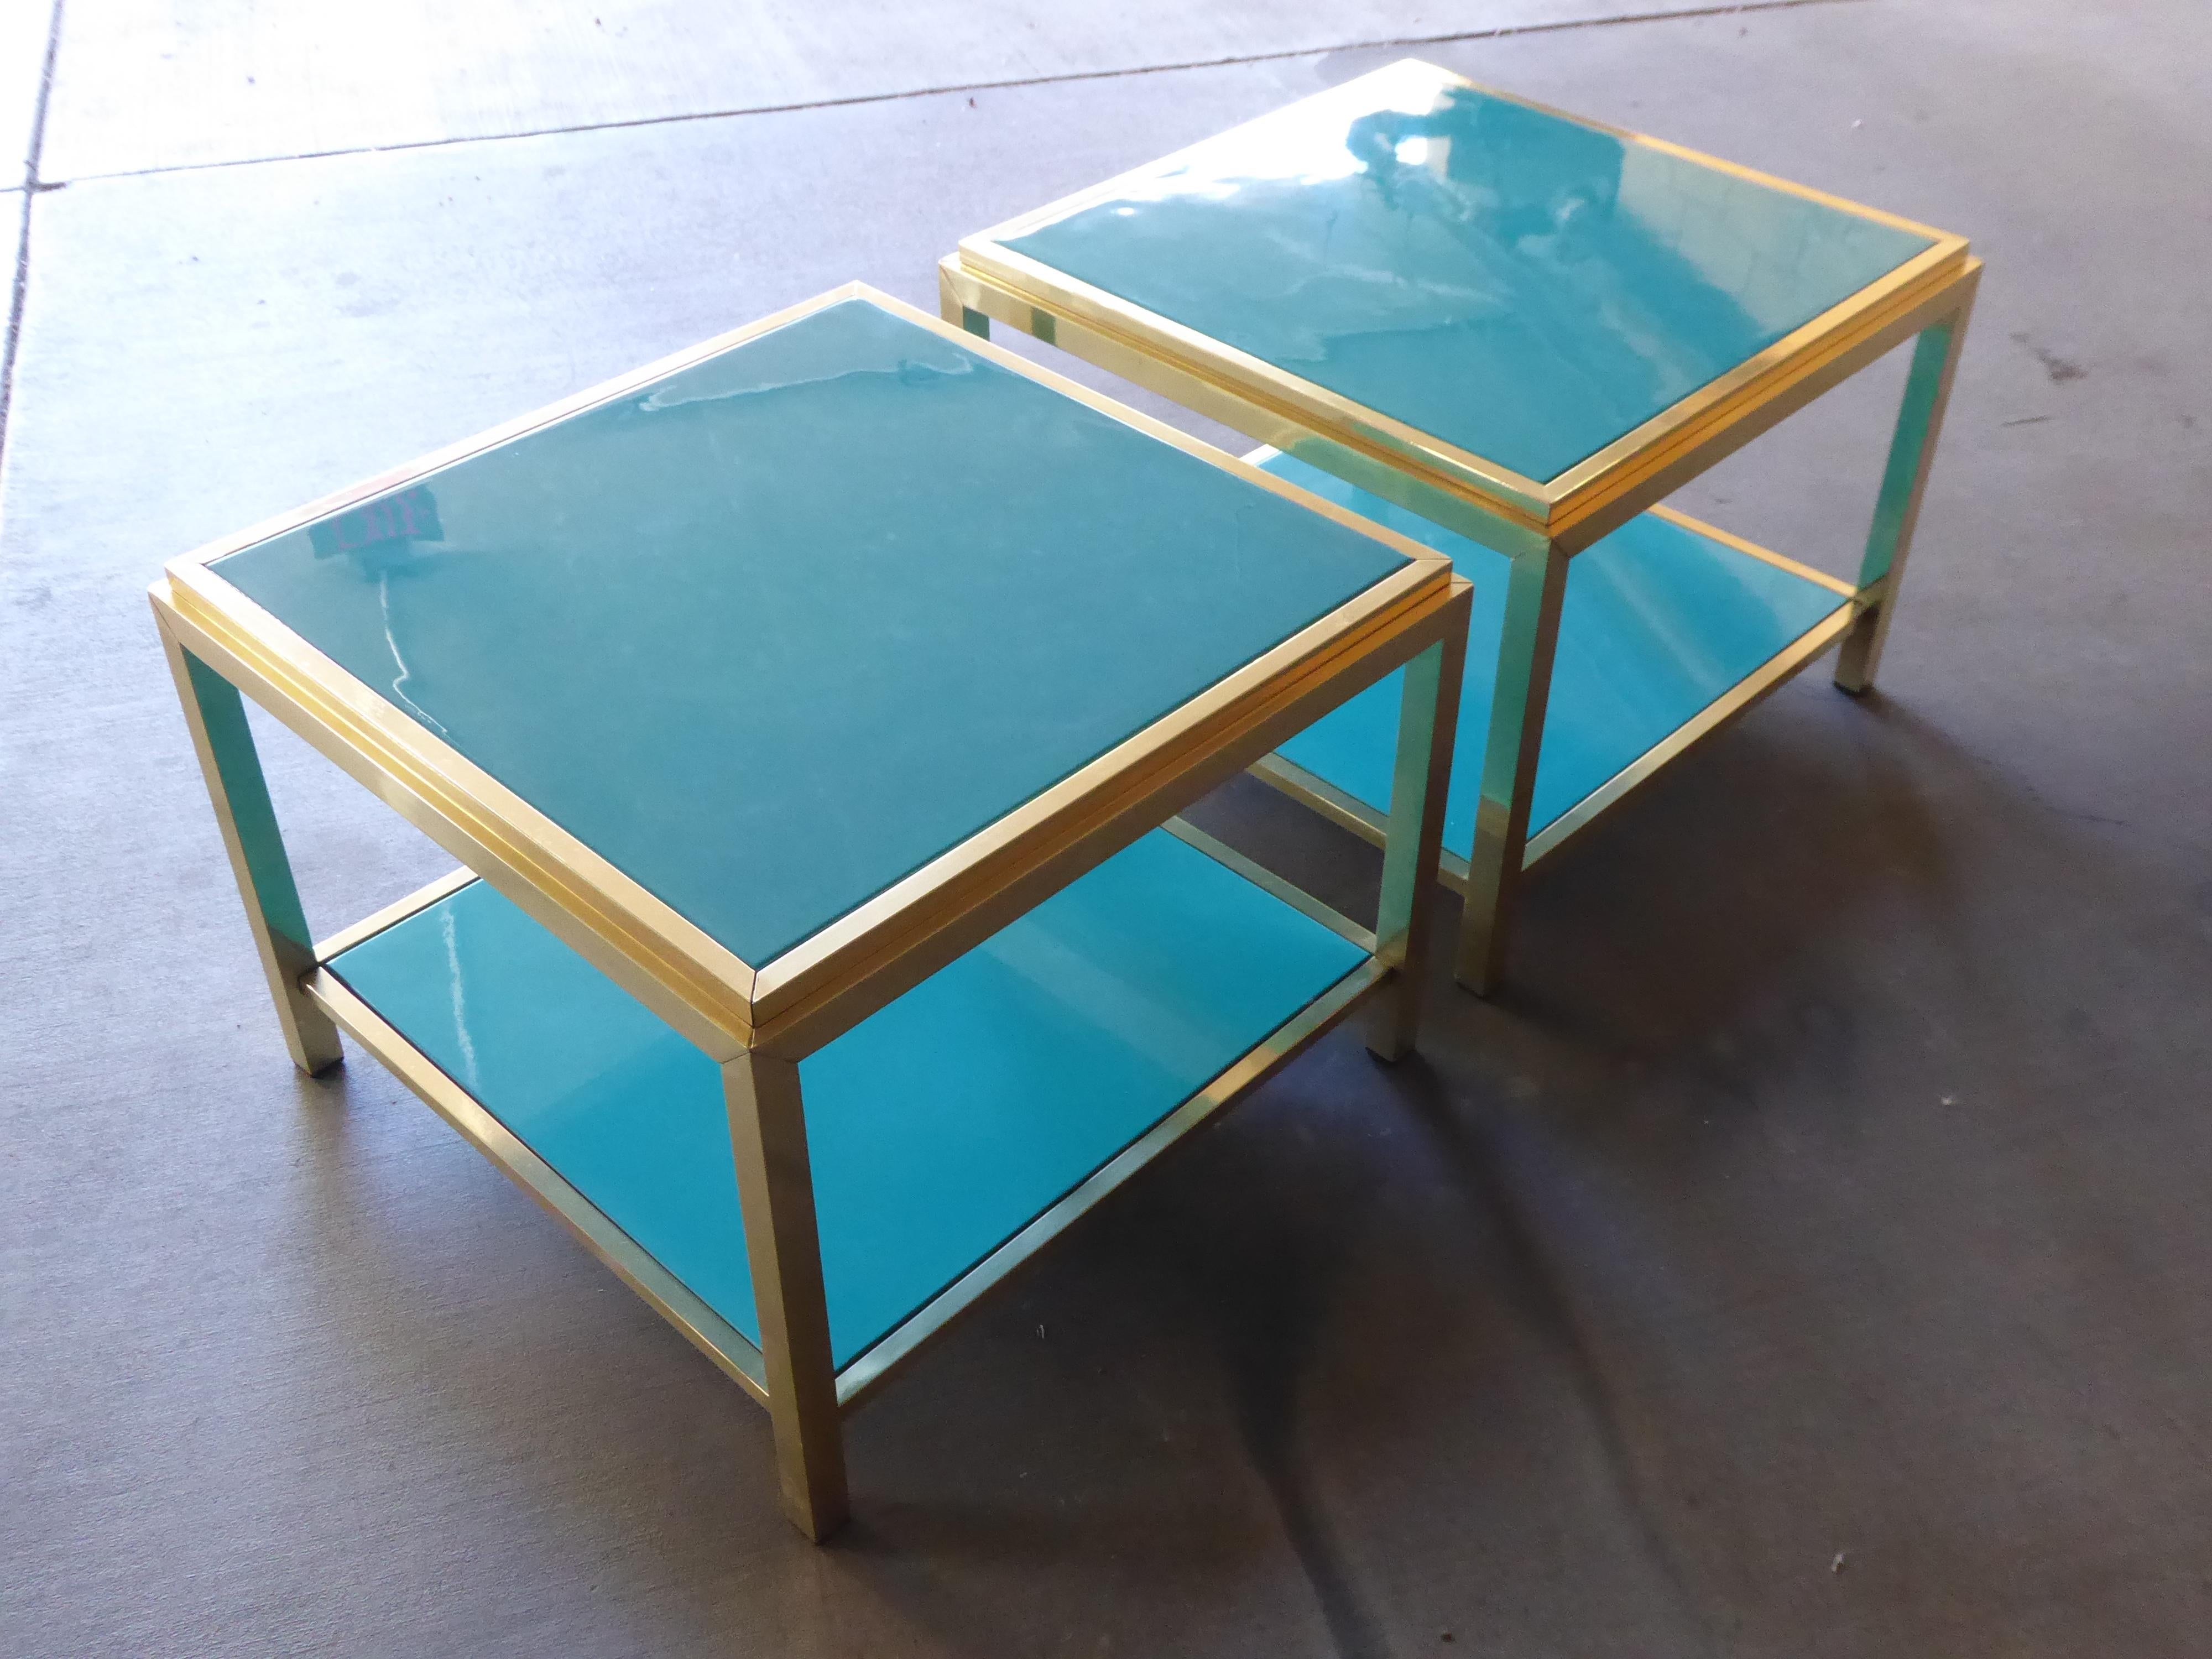 Pair of Brass and Lacquered Two-Tier Side Tables Attributed to Mastercraft 1